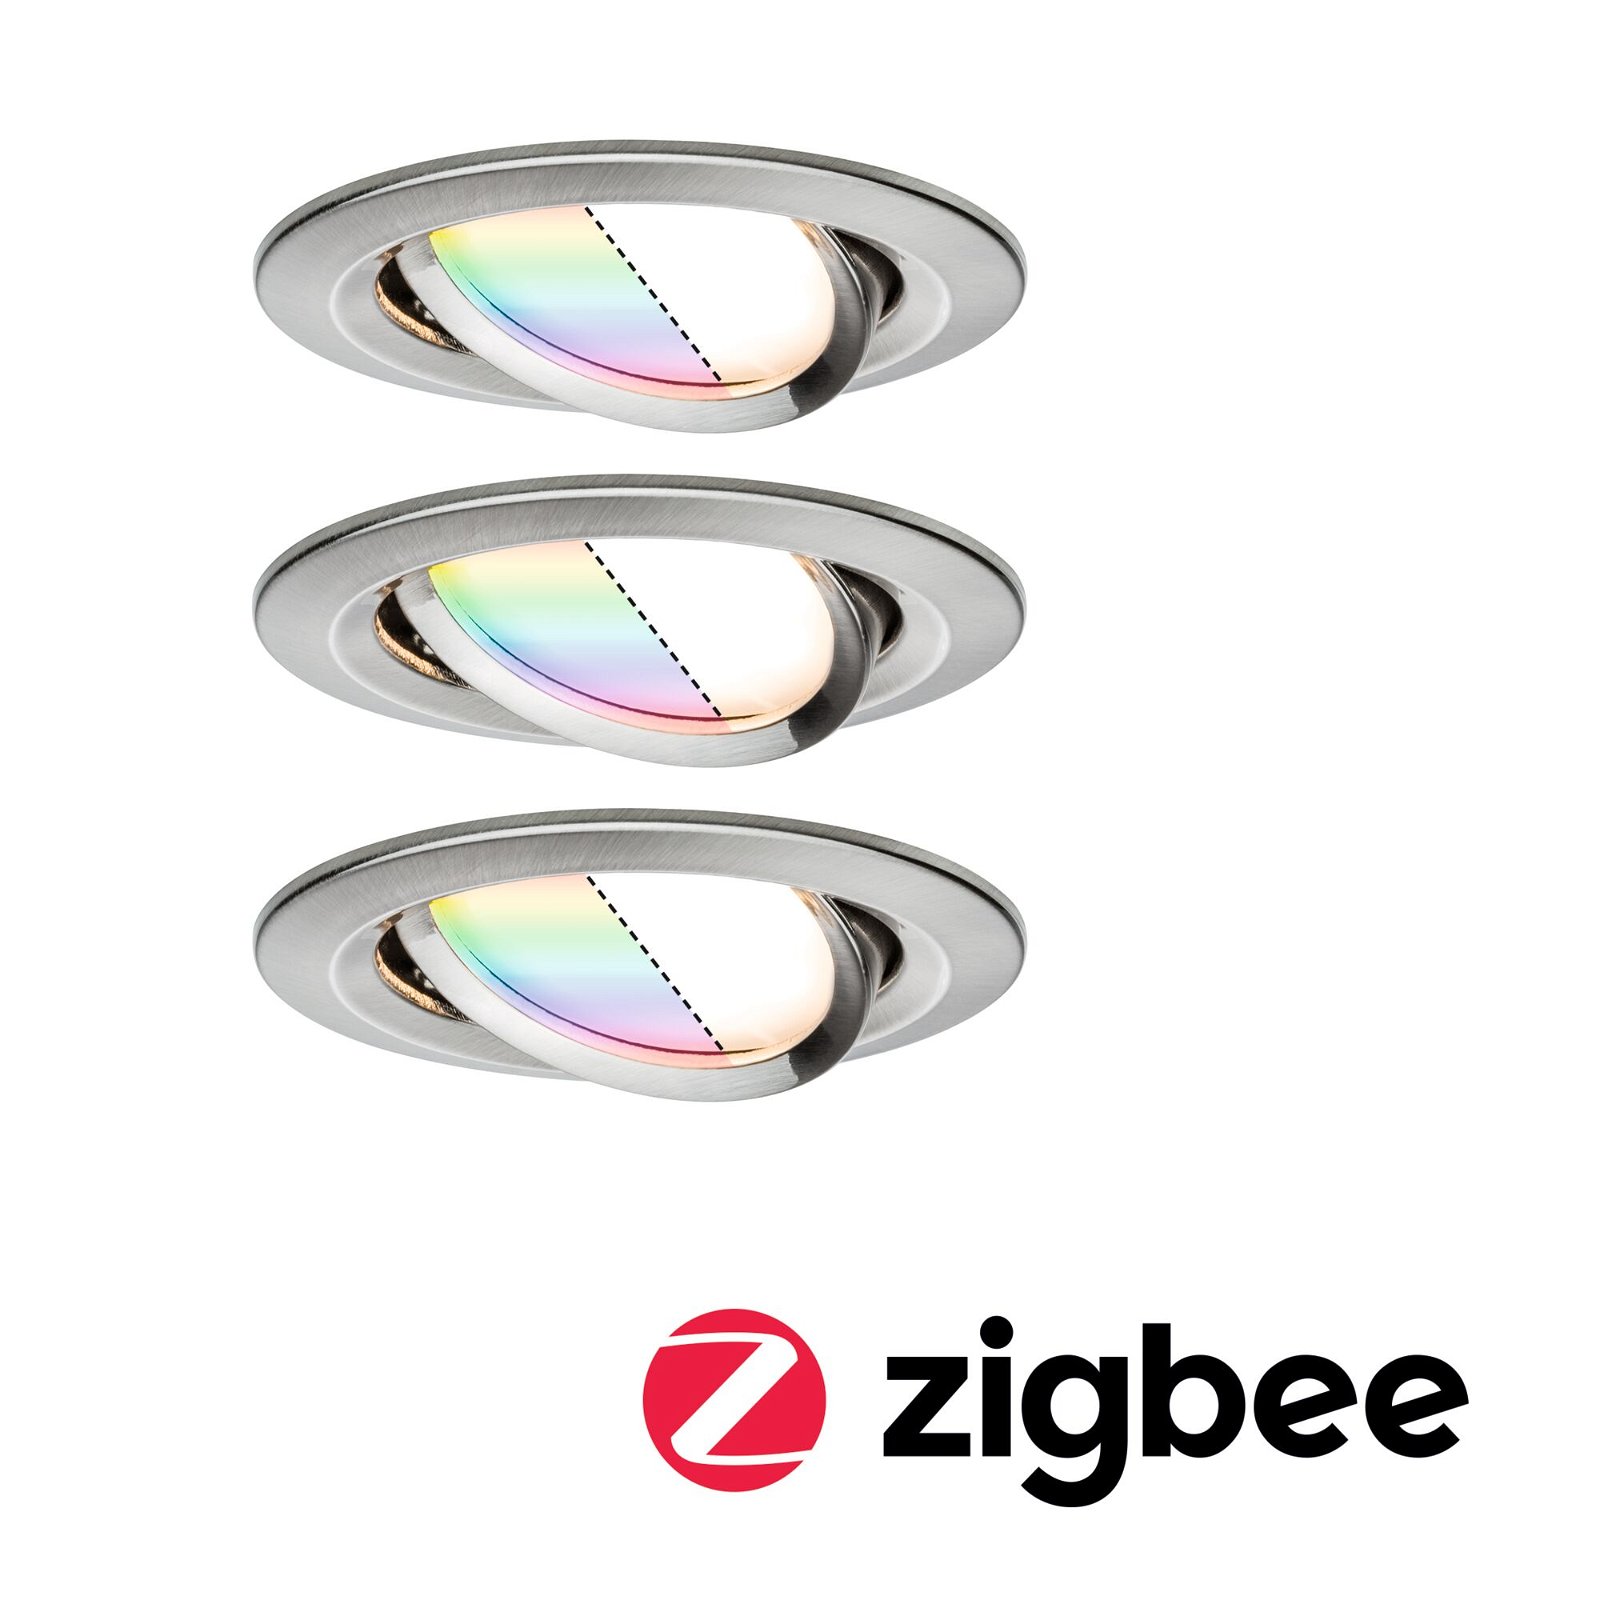 Smart Home Zigbee Bundle LED Recessed luminaire Nova Plus Swivelling + Remote control Gent swivelling round 84mm 50° Coin 3x5,2W 3x400lm 230V dimmable RGBW brushed iron